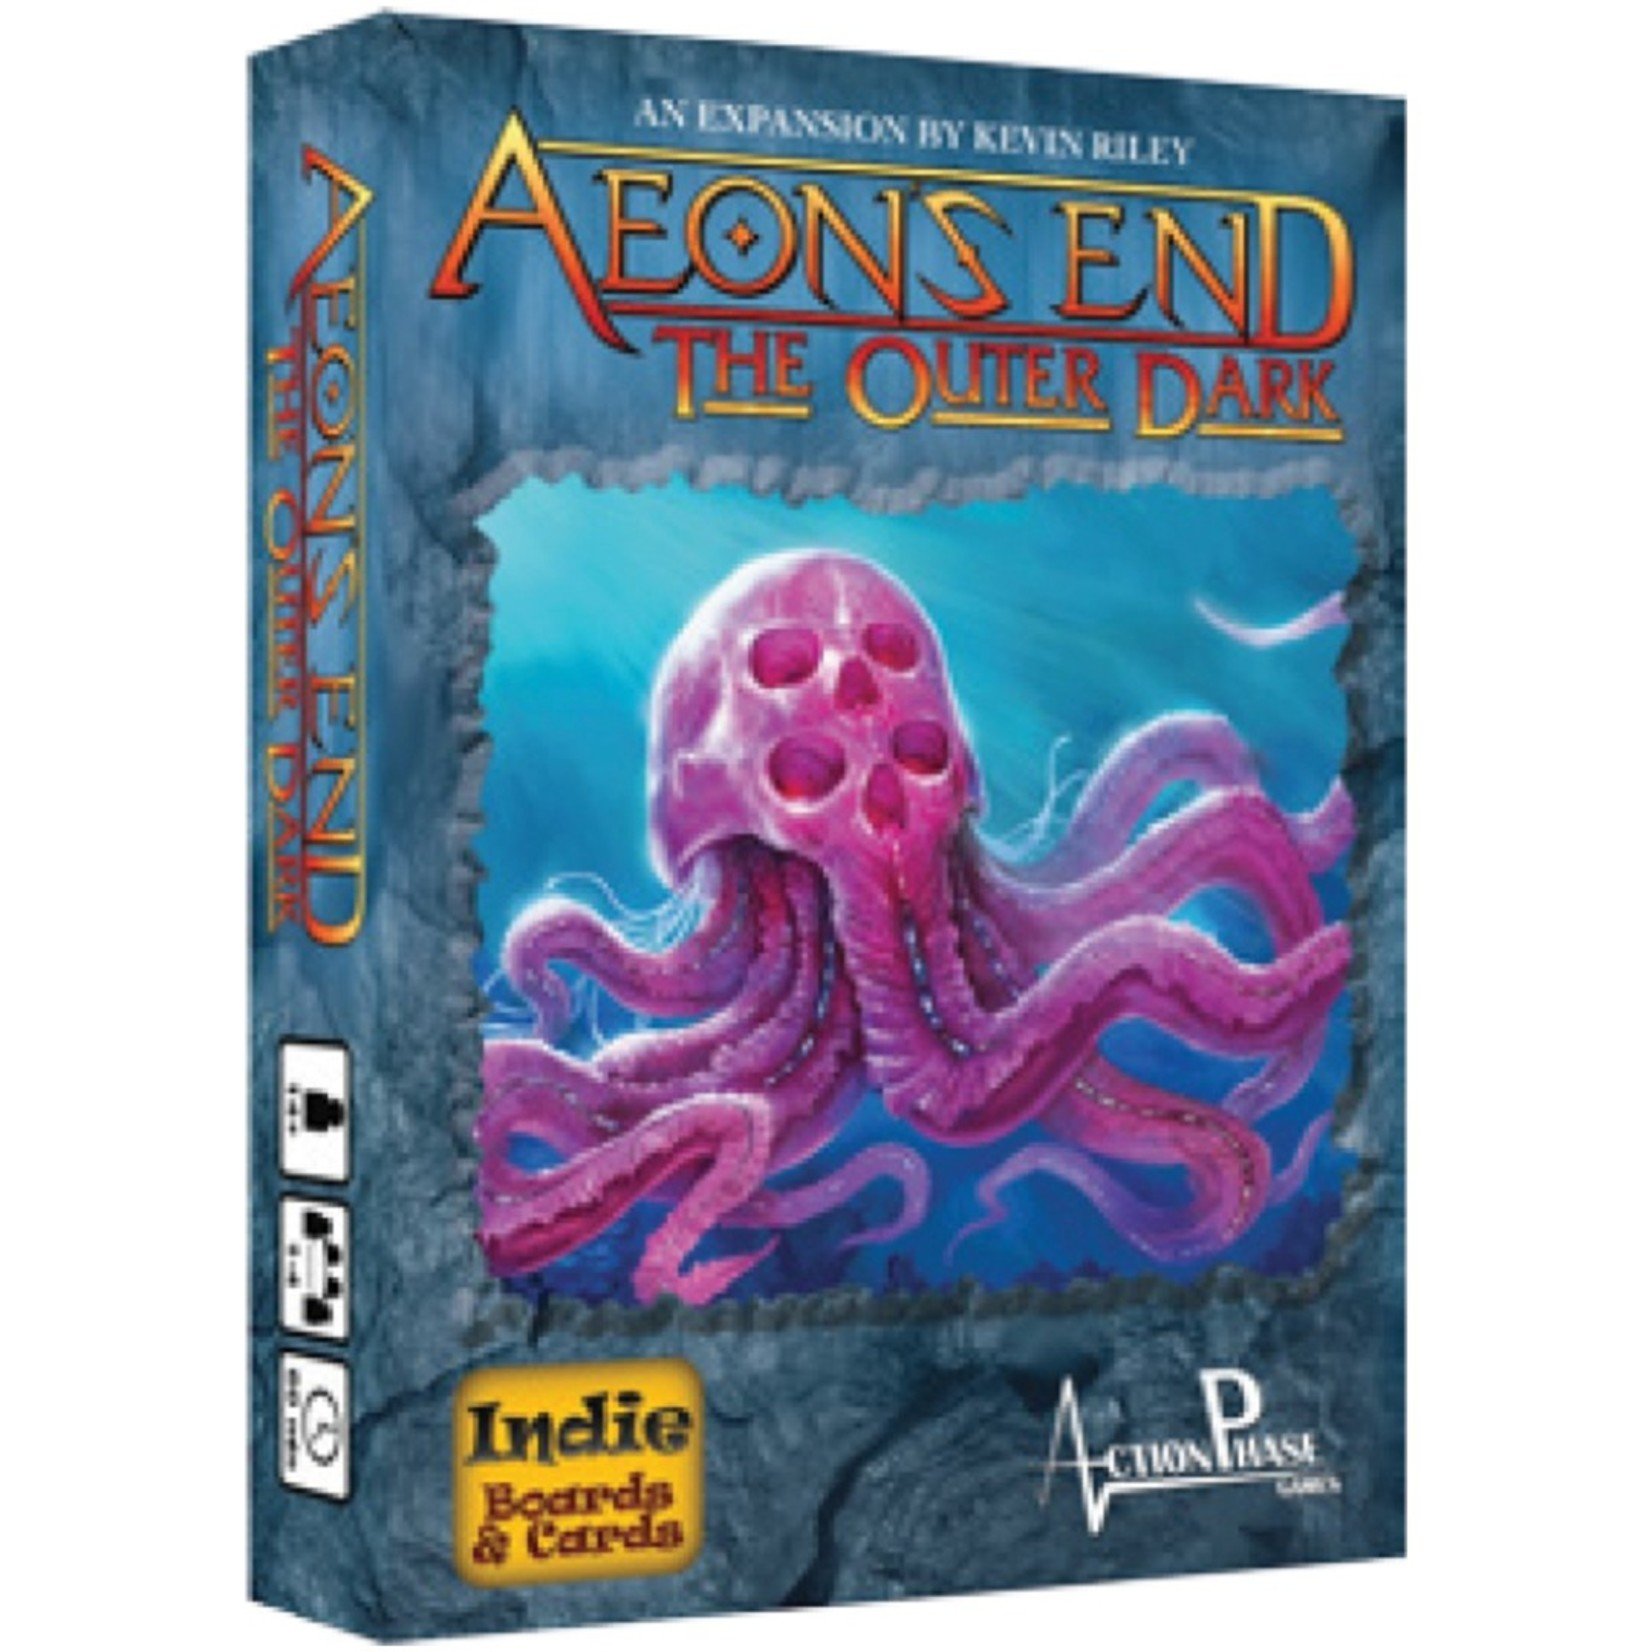 Indie Board and Card Aeon's End The Outer Dark Expansion